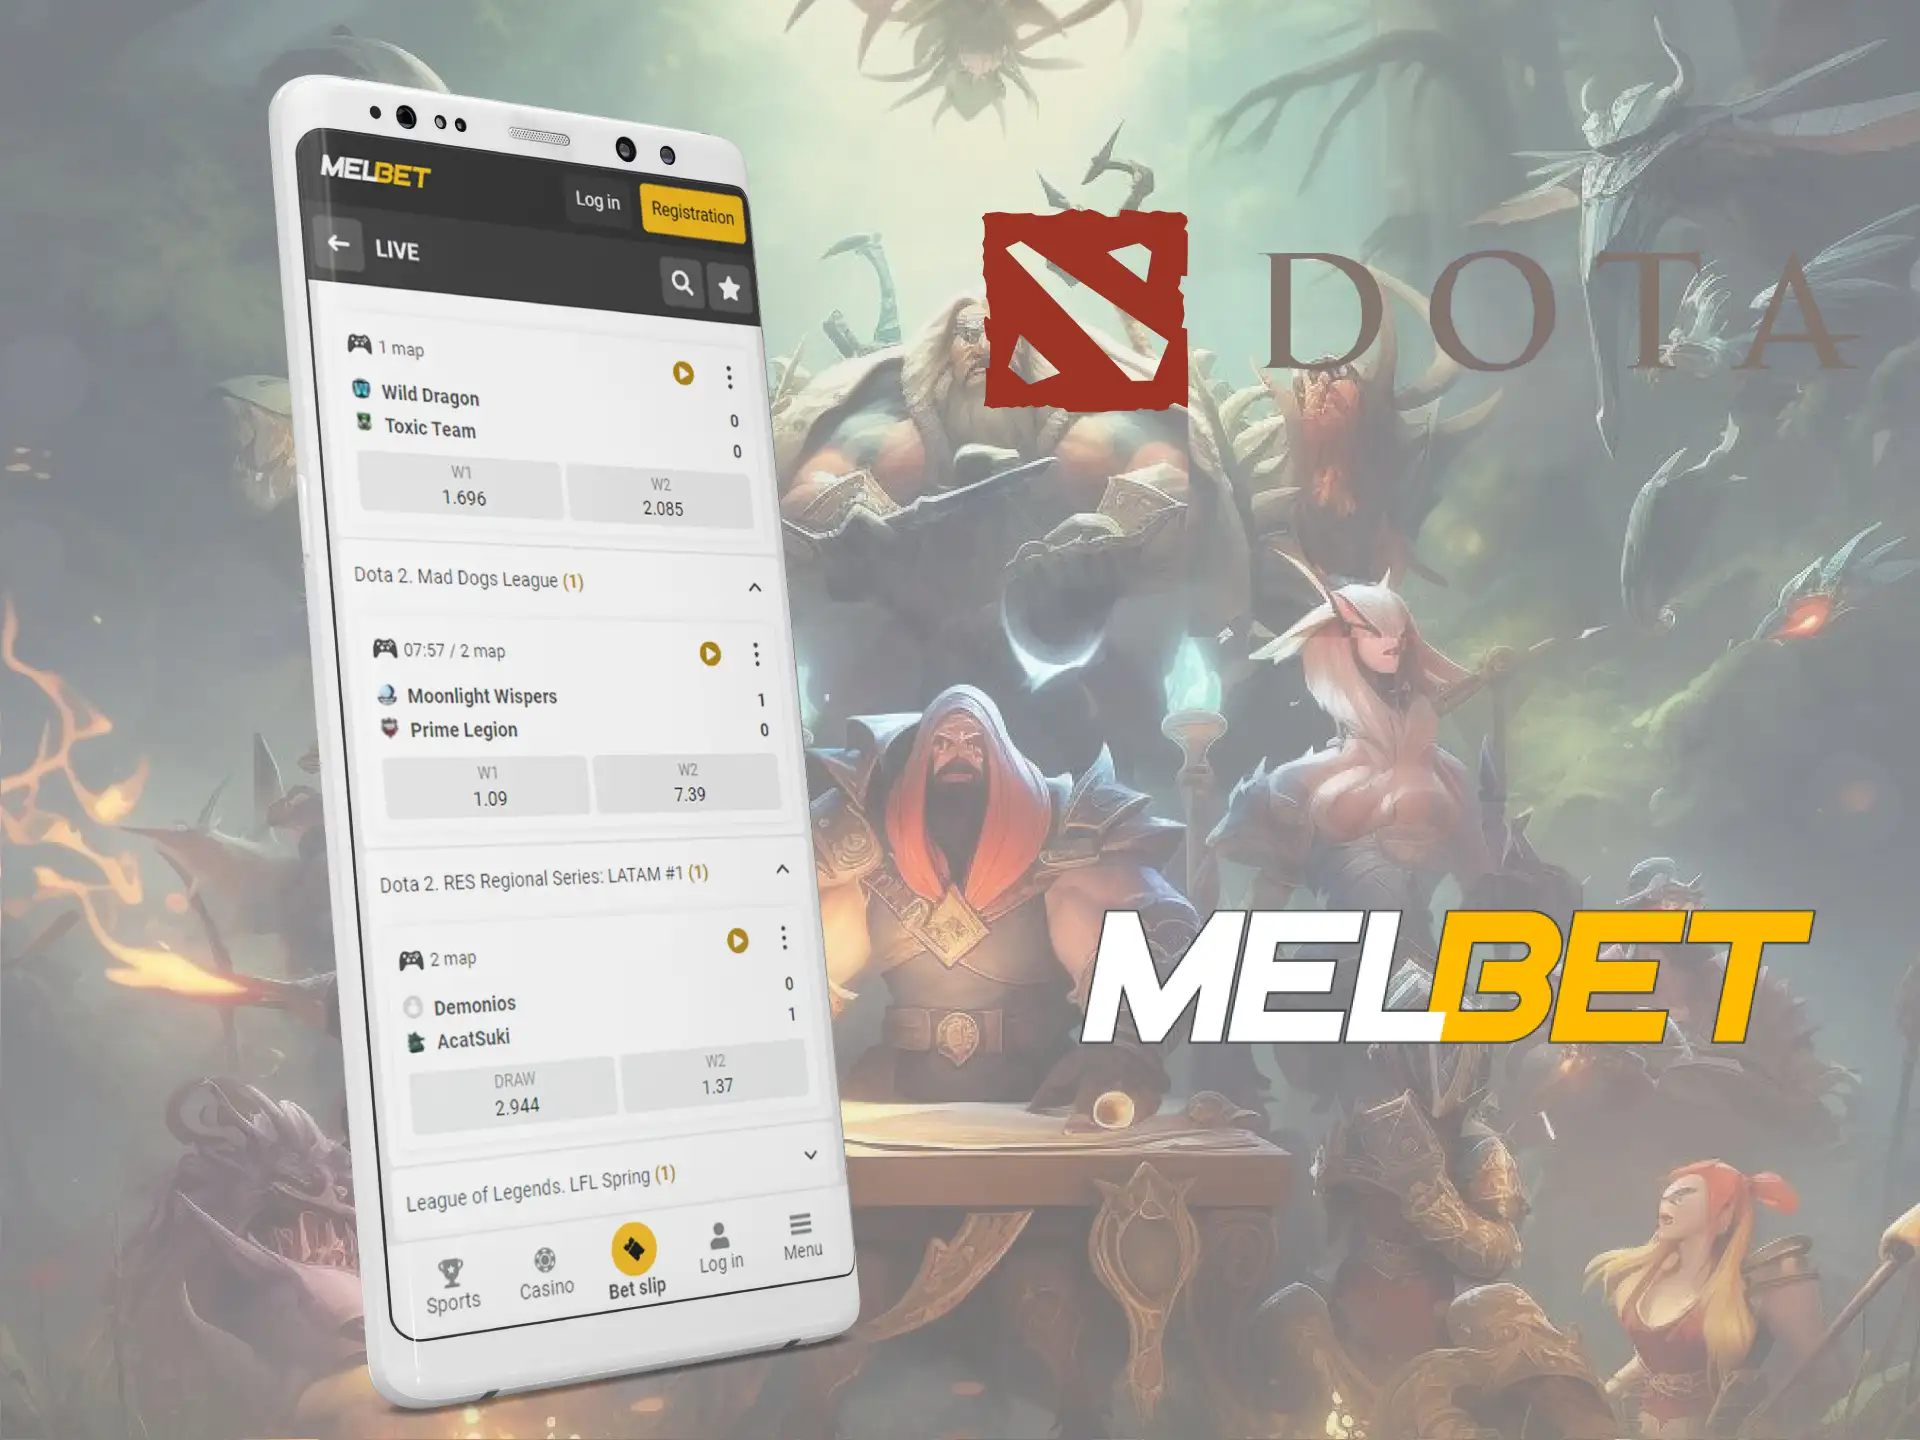 The Melbet app for Android and iOS allow you to bet on Dota 2.